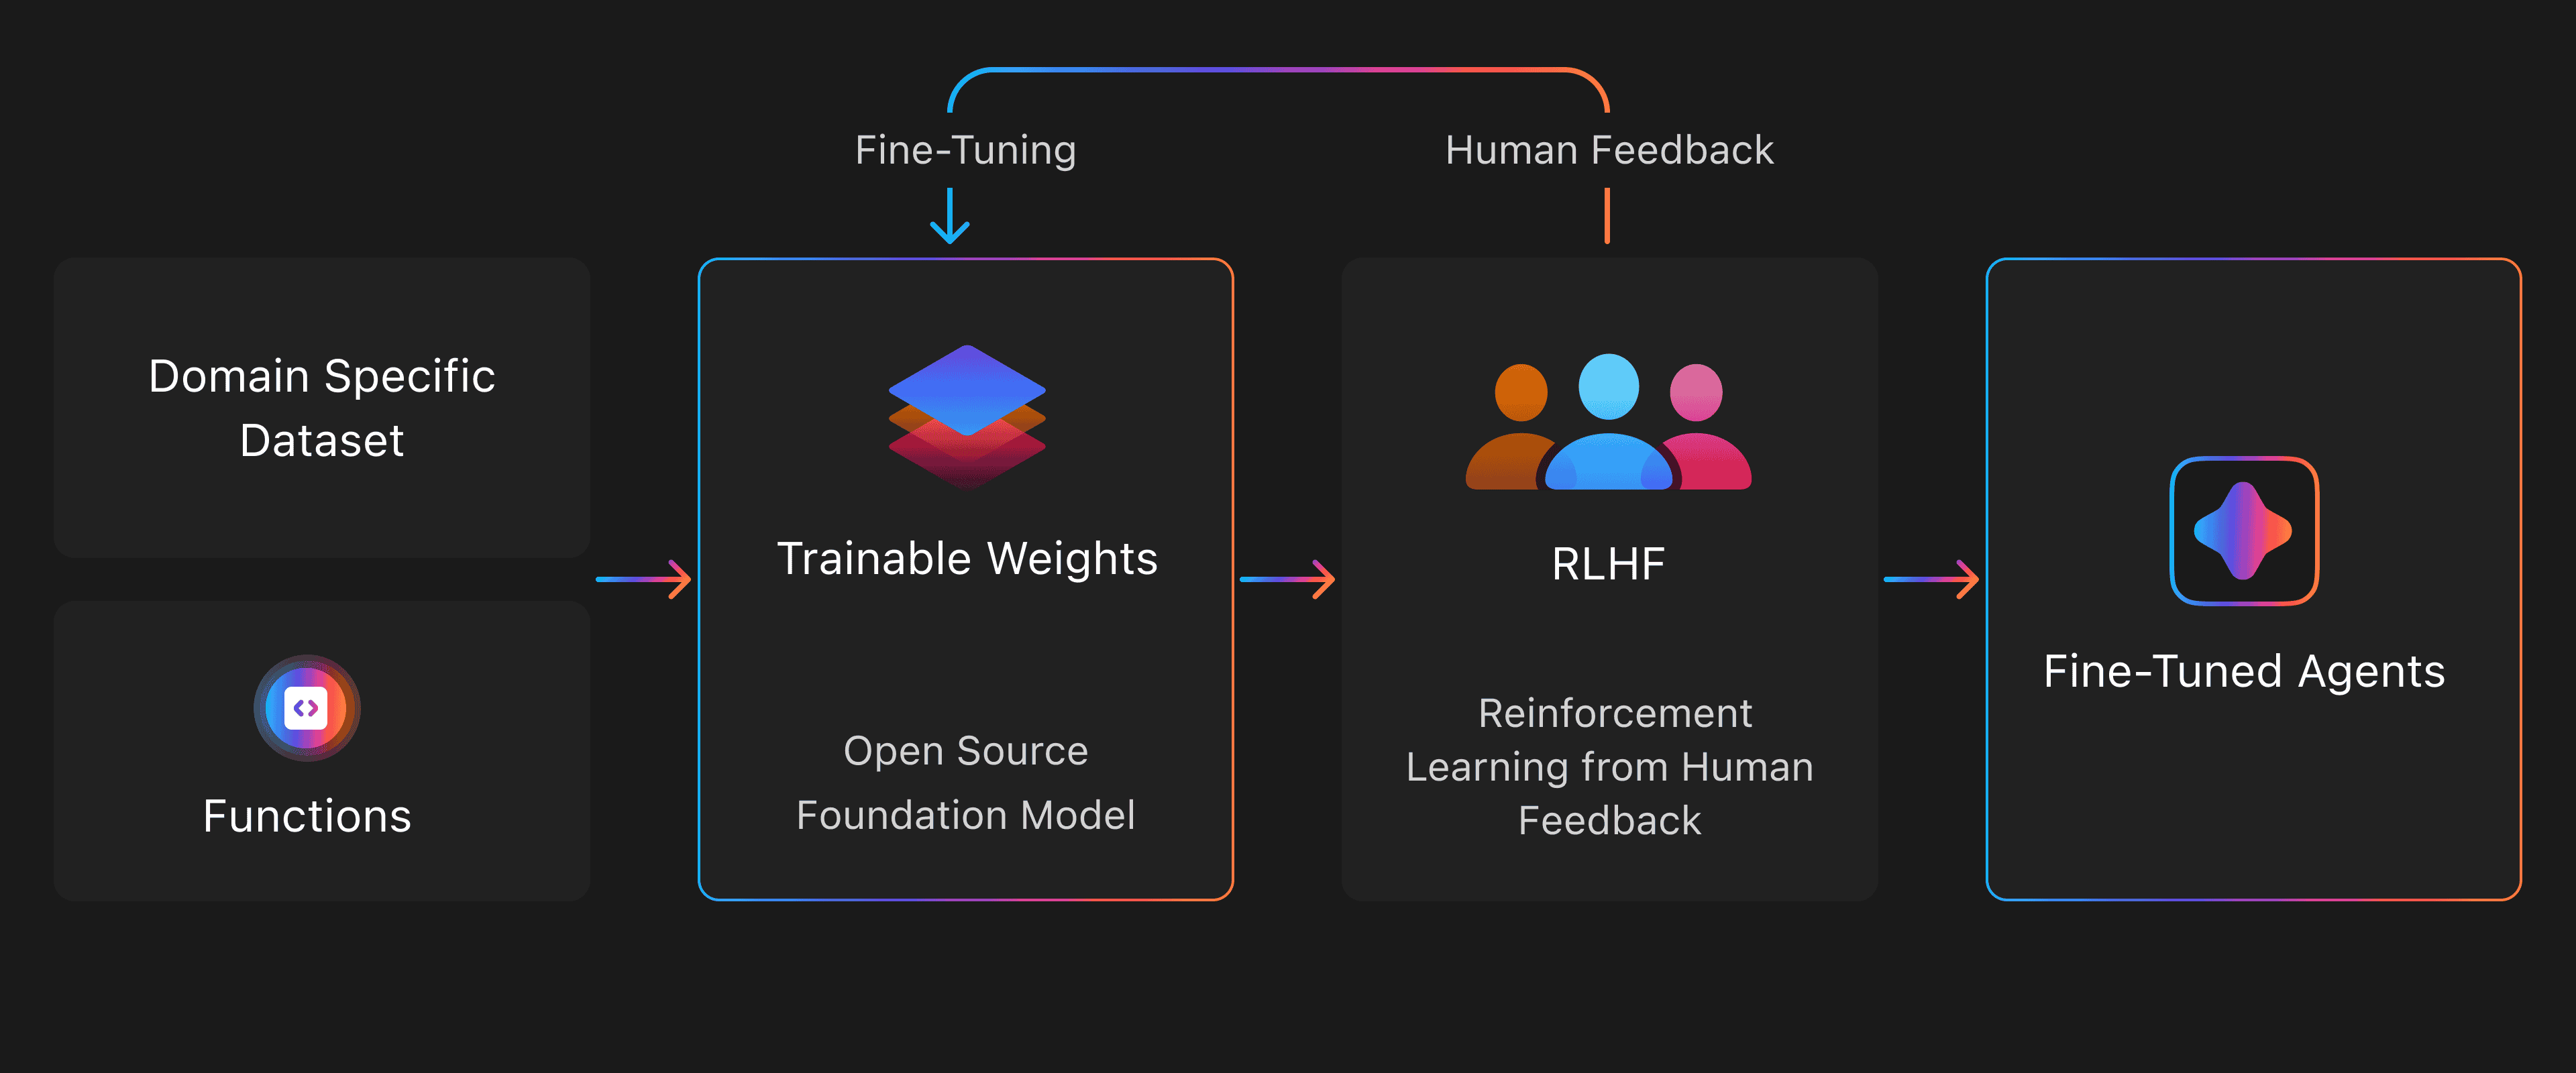 Flowchart illustrating Origon AI's fine-tuning process, starting with a domain-specific dataset and functions, leading to an open-source foundation model with trainable weights, then improved through reinforcement learning from human feedback to create fine-tuned agents.